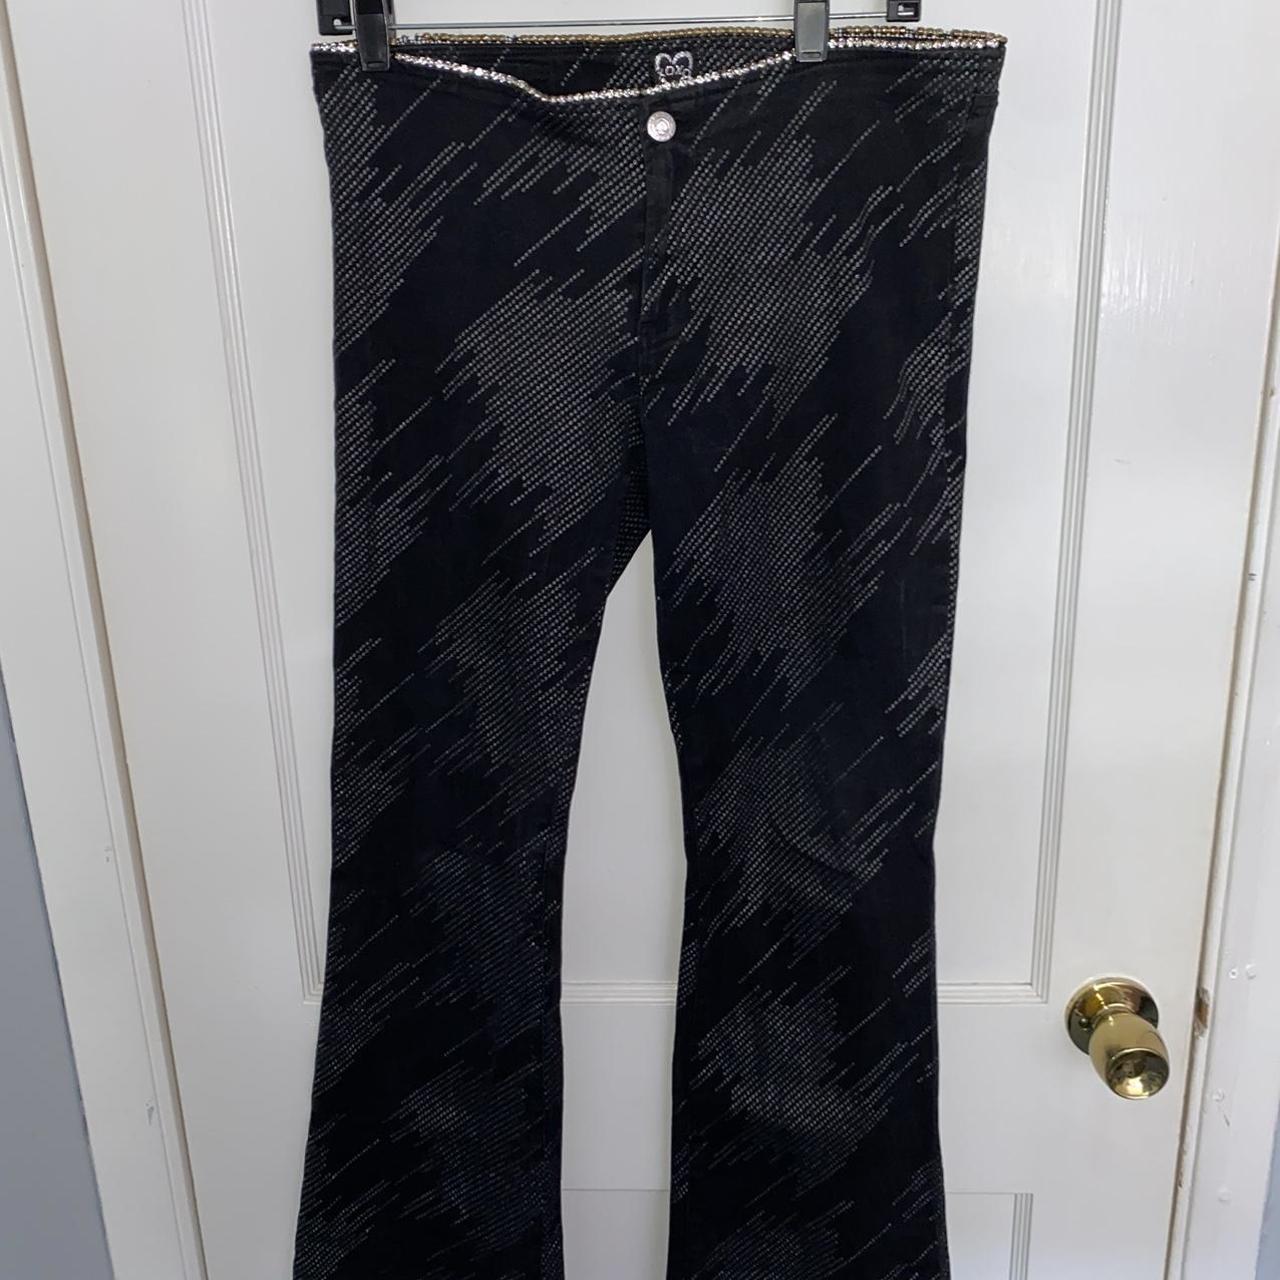 Women's Black and Silver Trousers | Depop